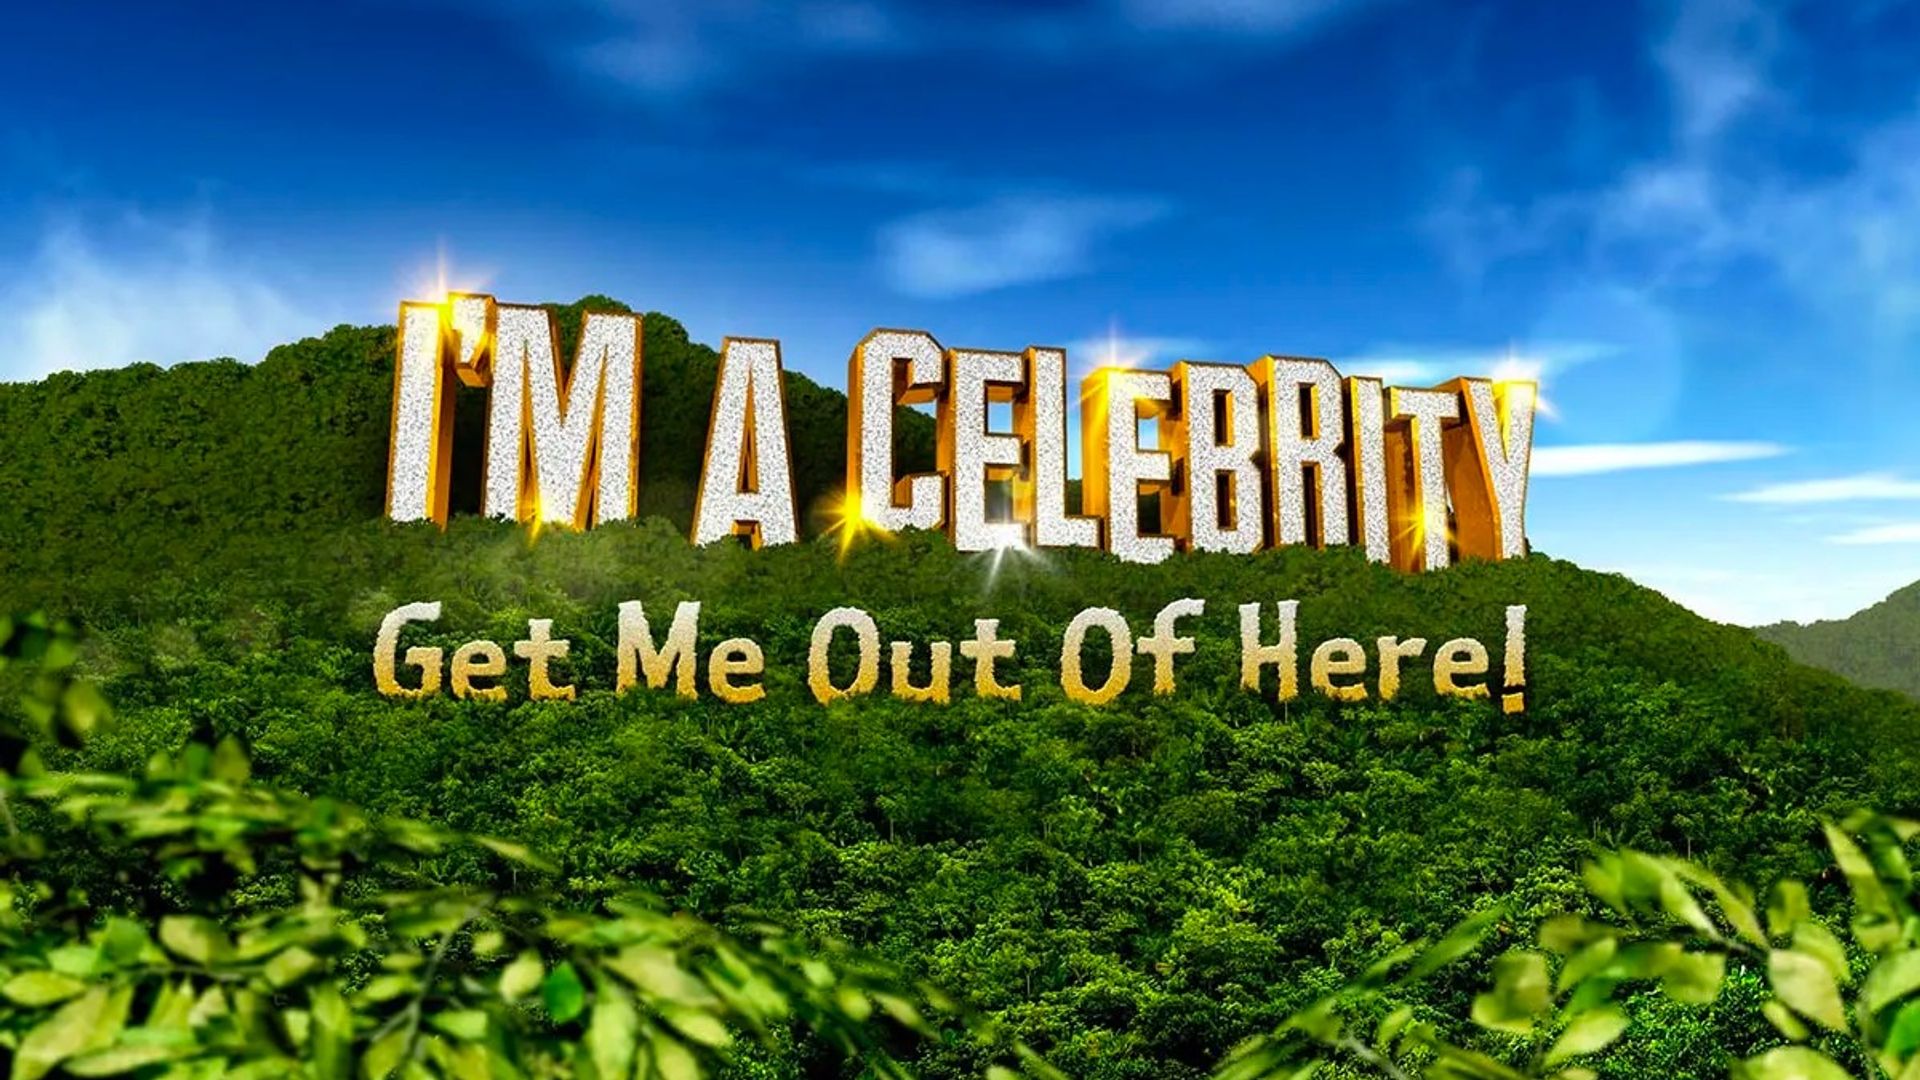 13 celebrities rumoured to be joining I'm a Celebrity 2023